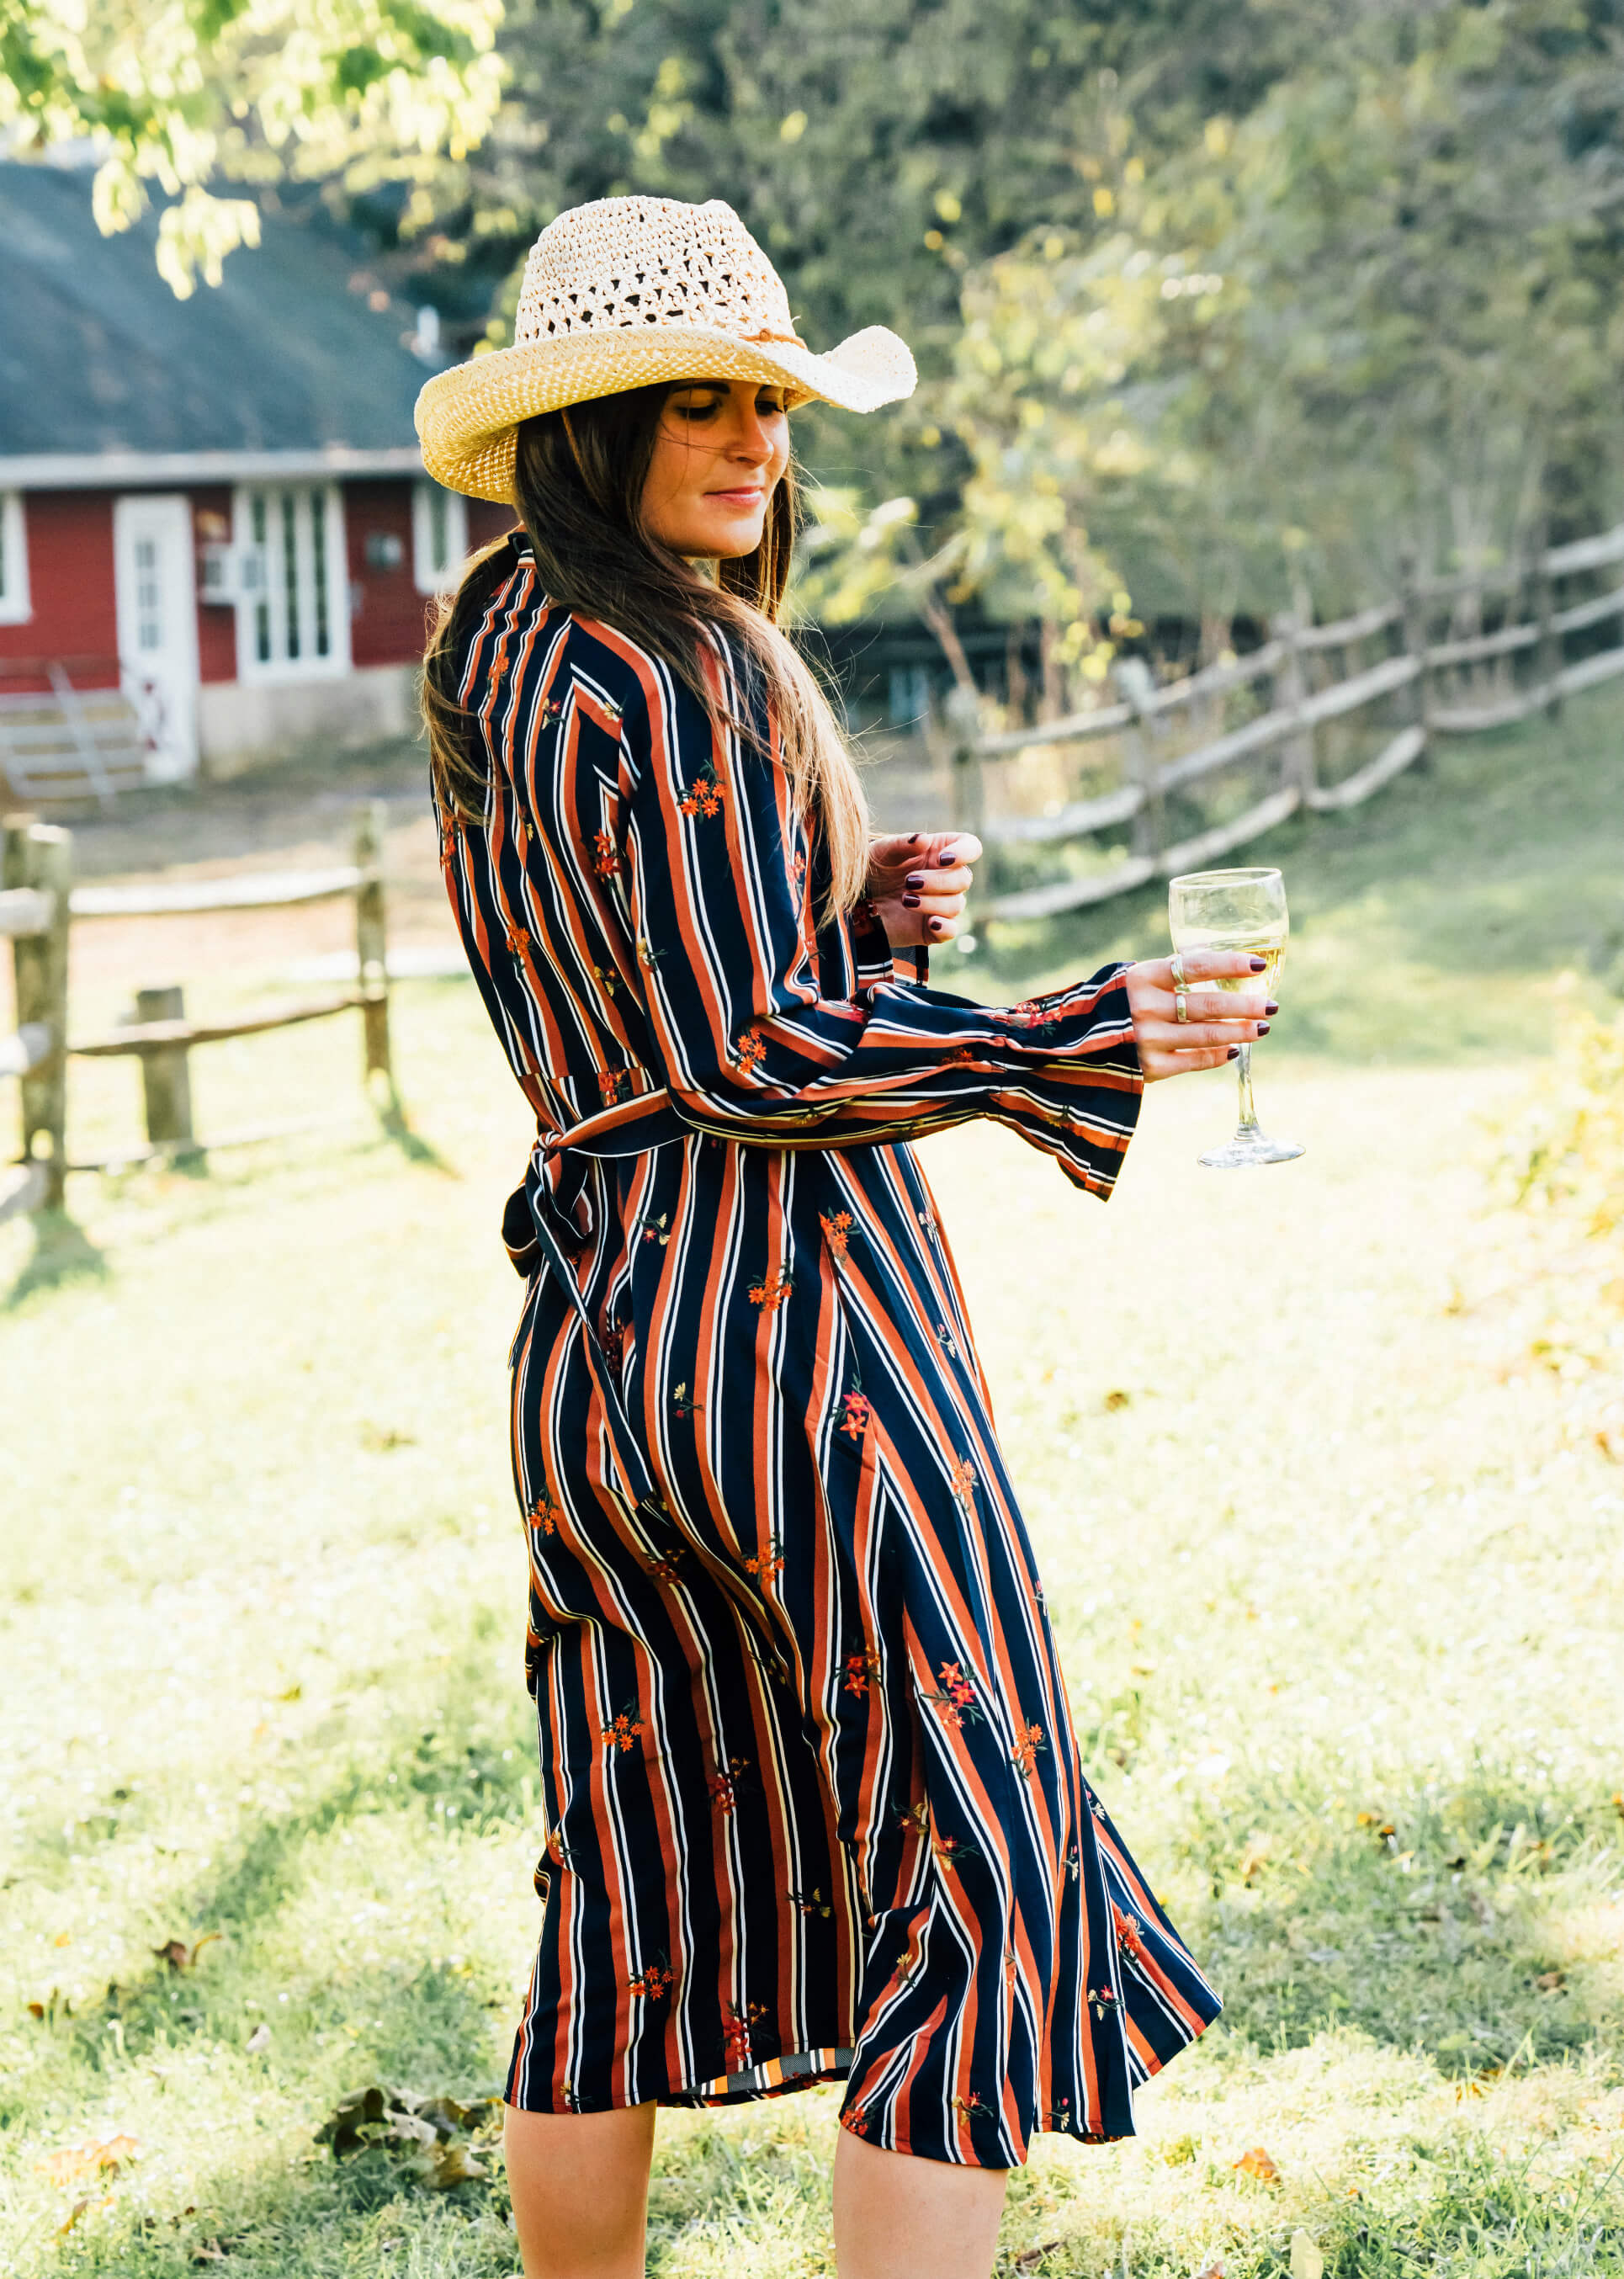 Miss Me Stripe Midi Shirtdress with Floral Embroidery, Straw Hat, Fall Dress Outfit Idea, AVA Grace Vineyards, Tilden of To Be Bright